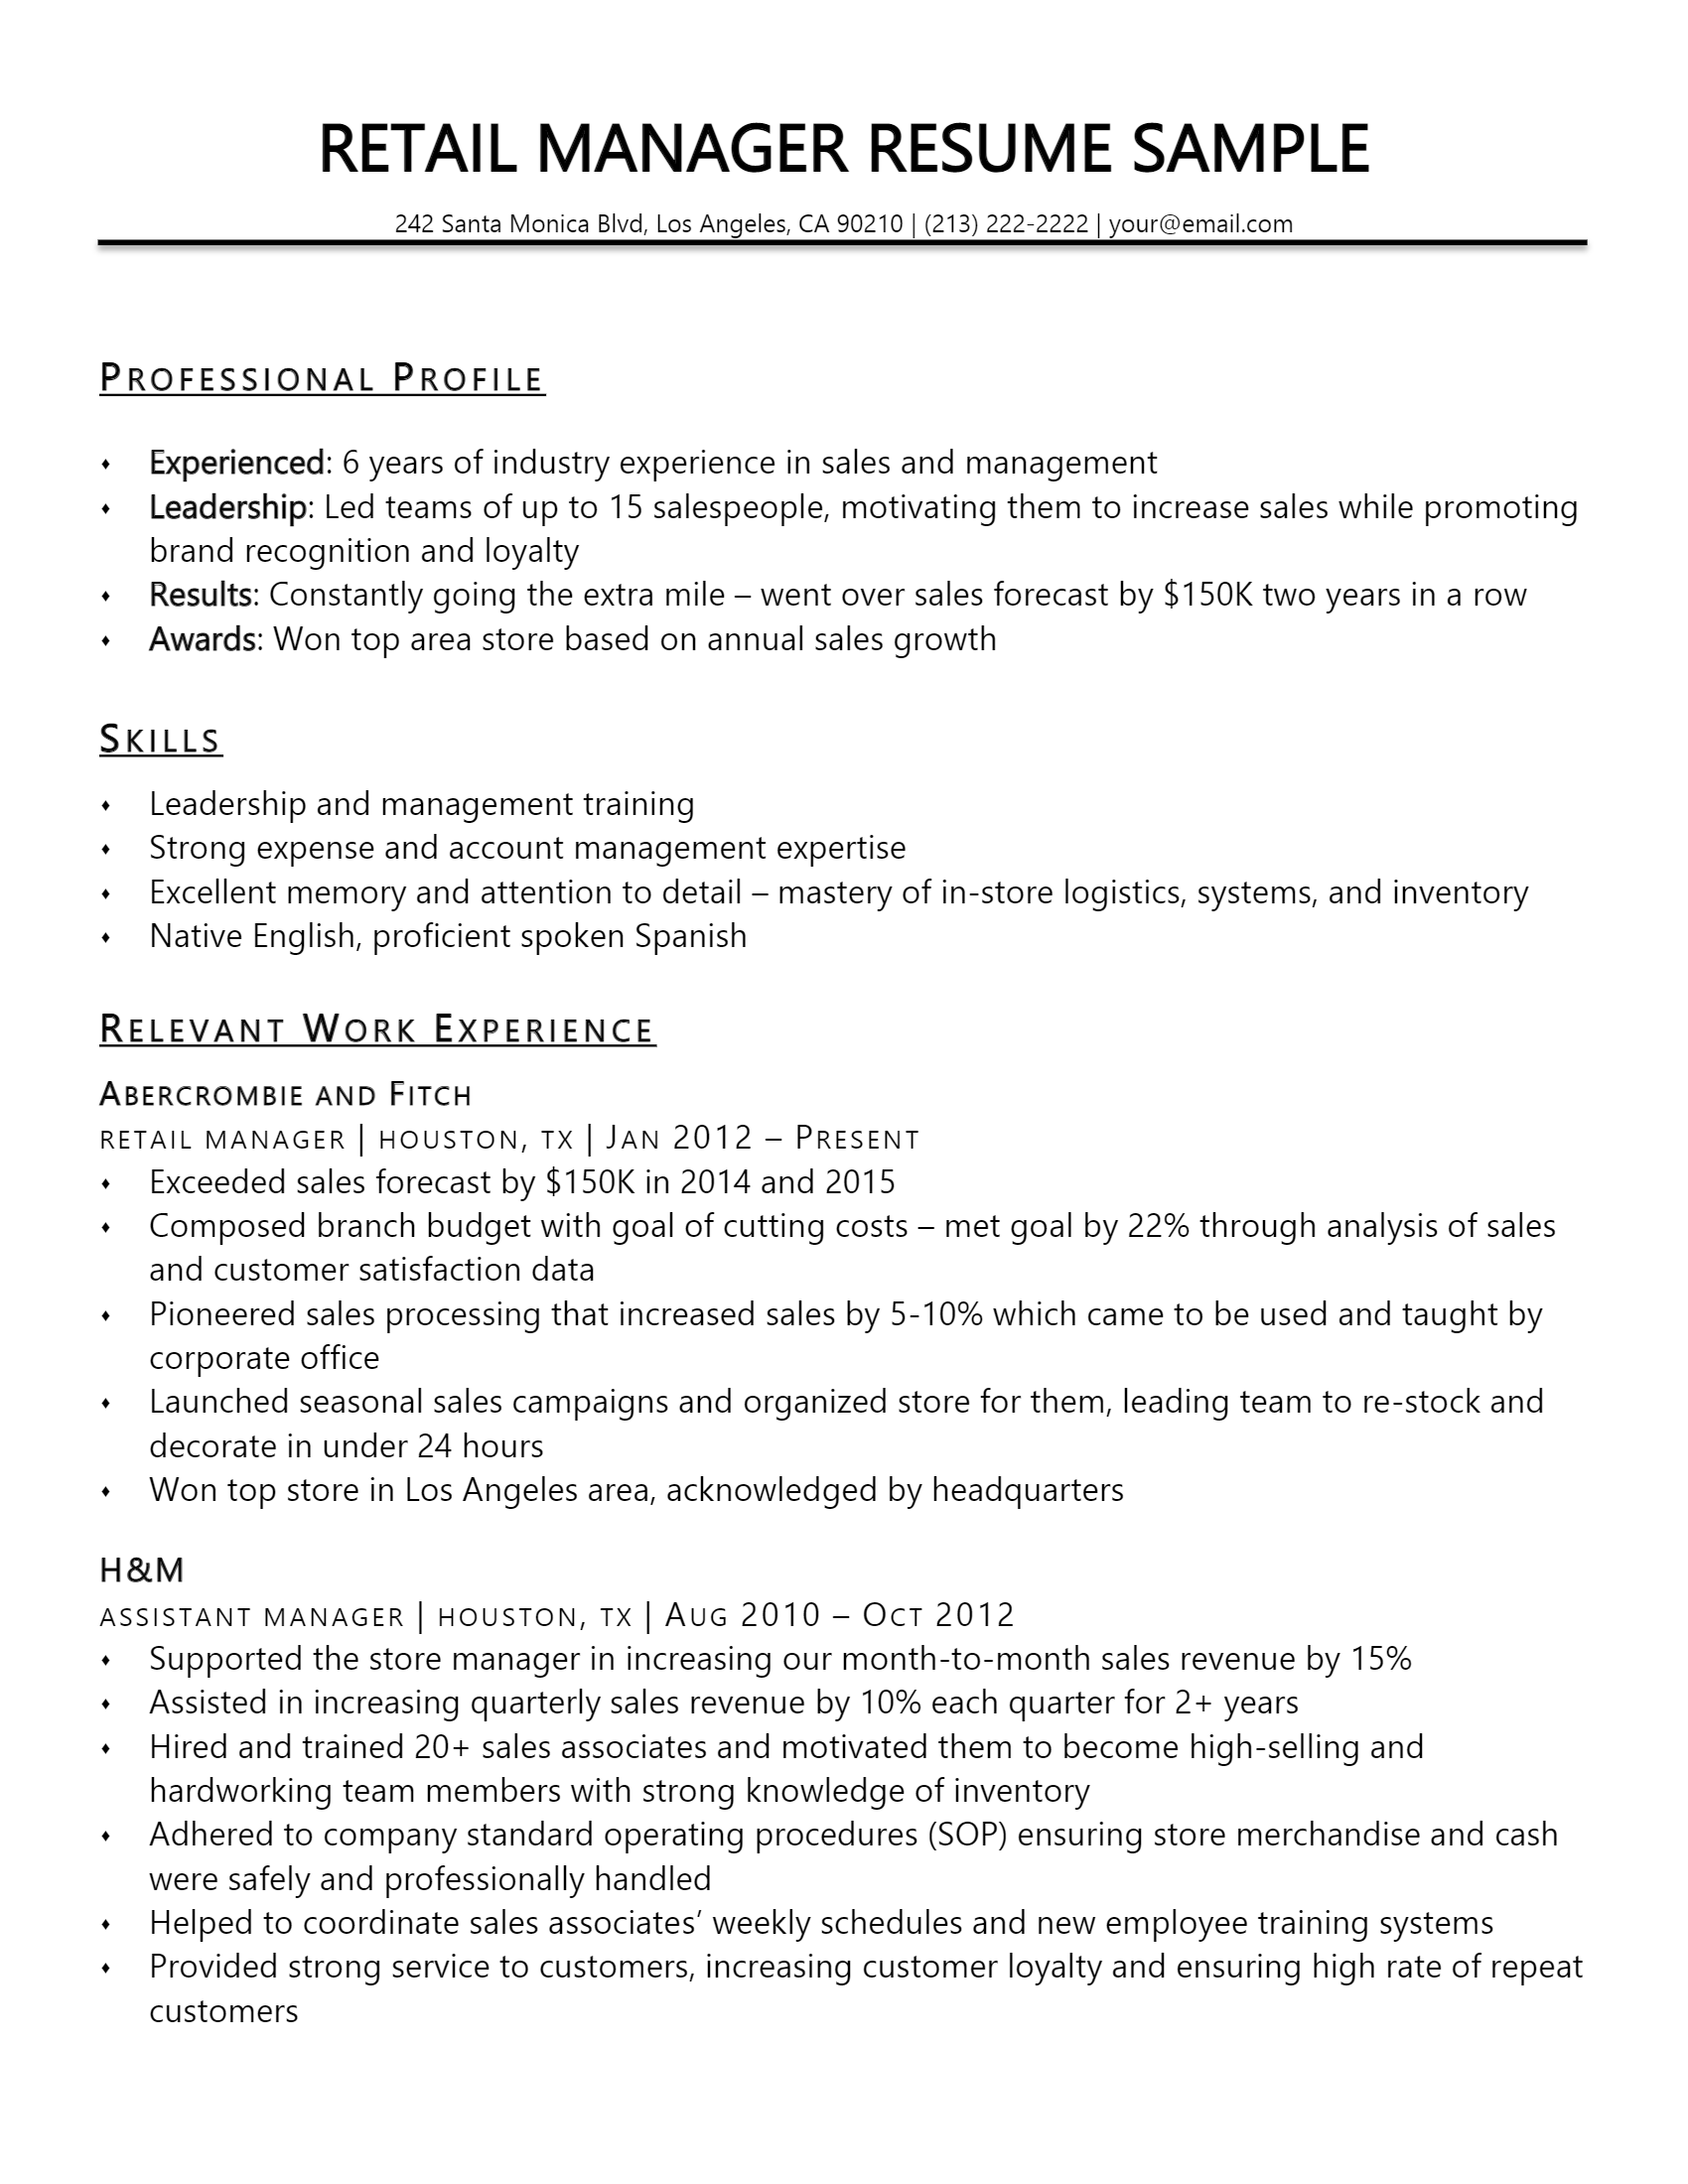 Retail Manager Resume .Docx (Word)